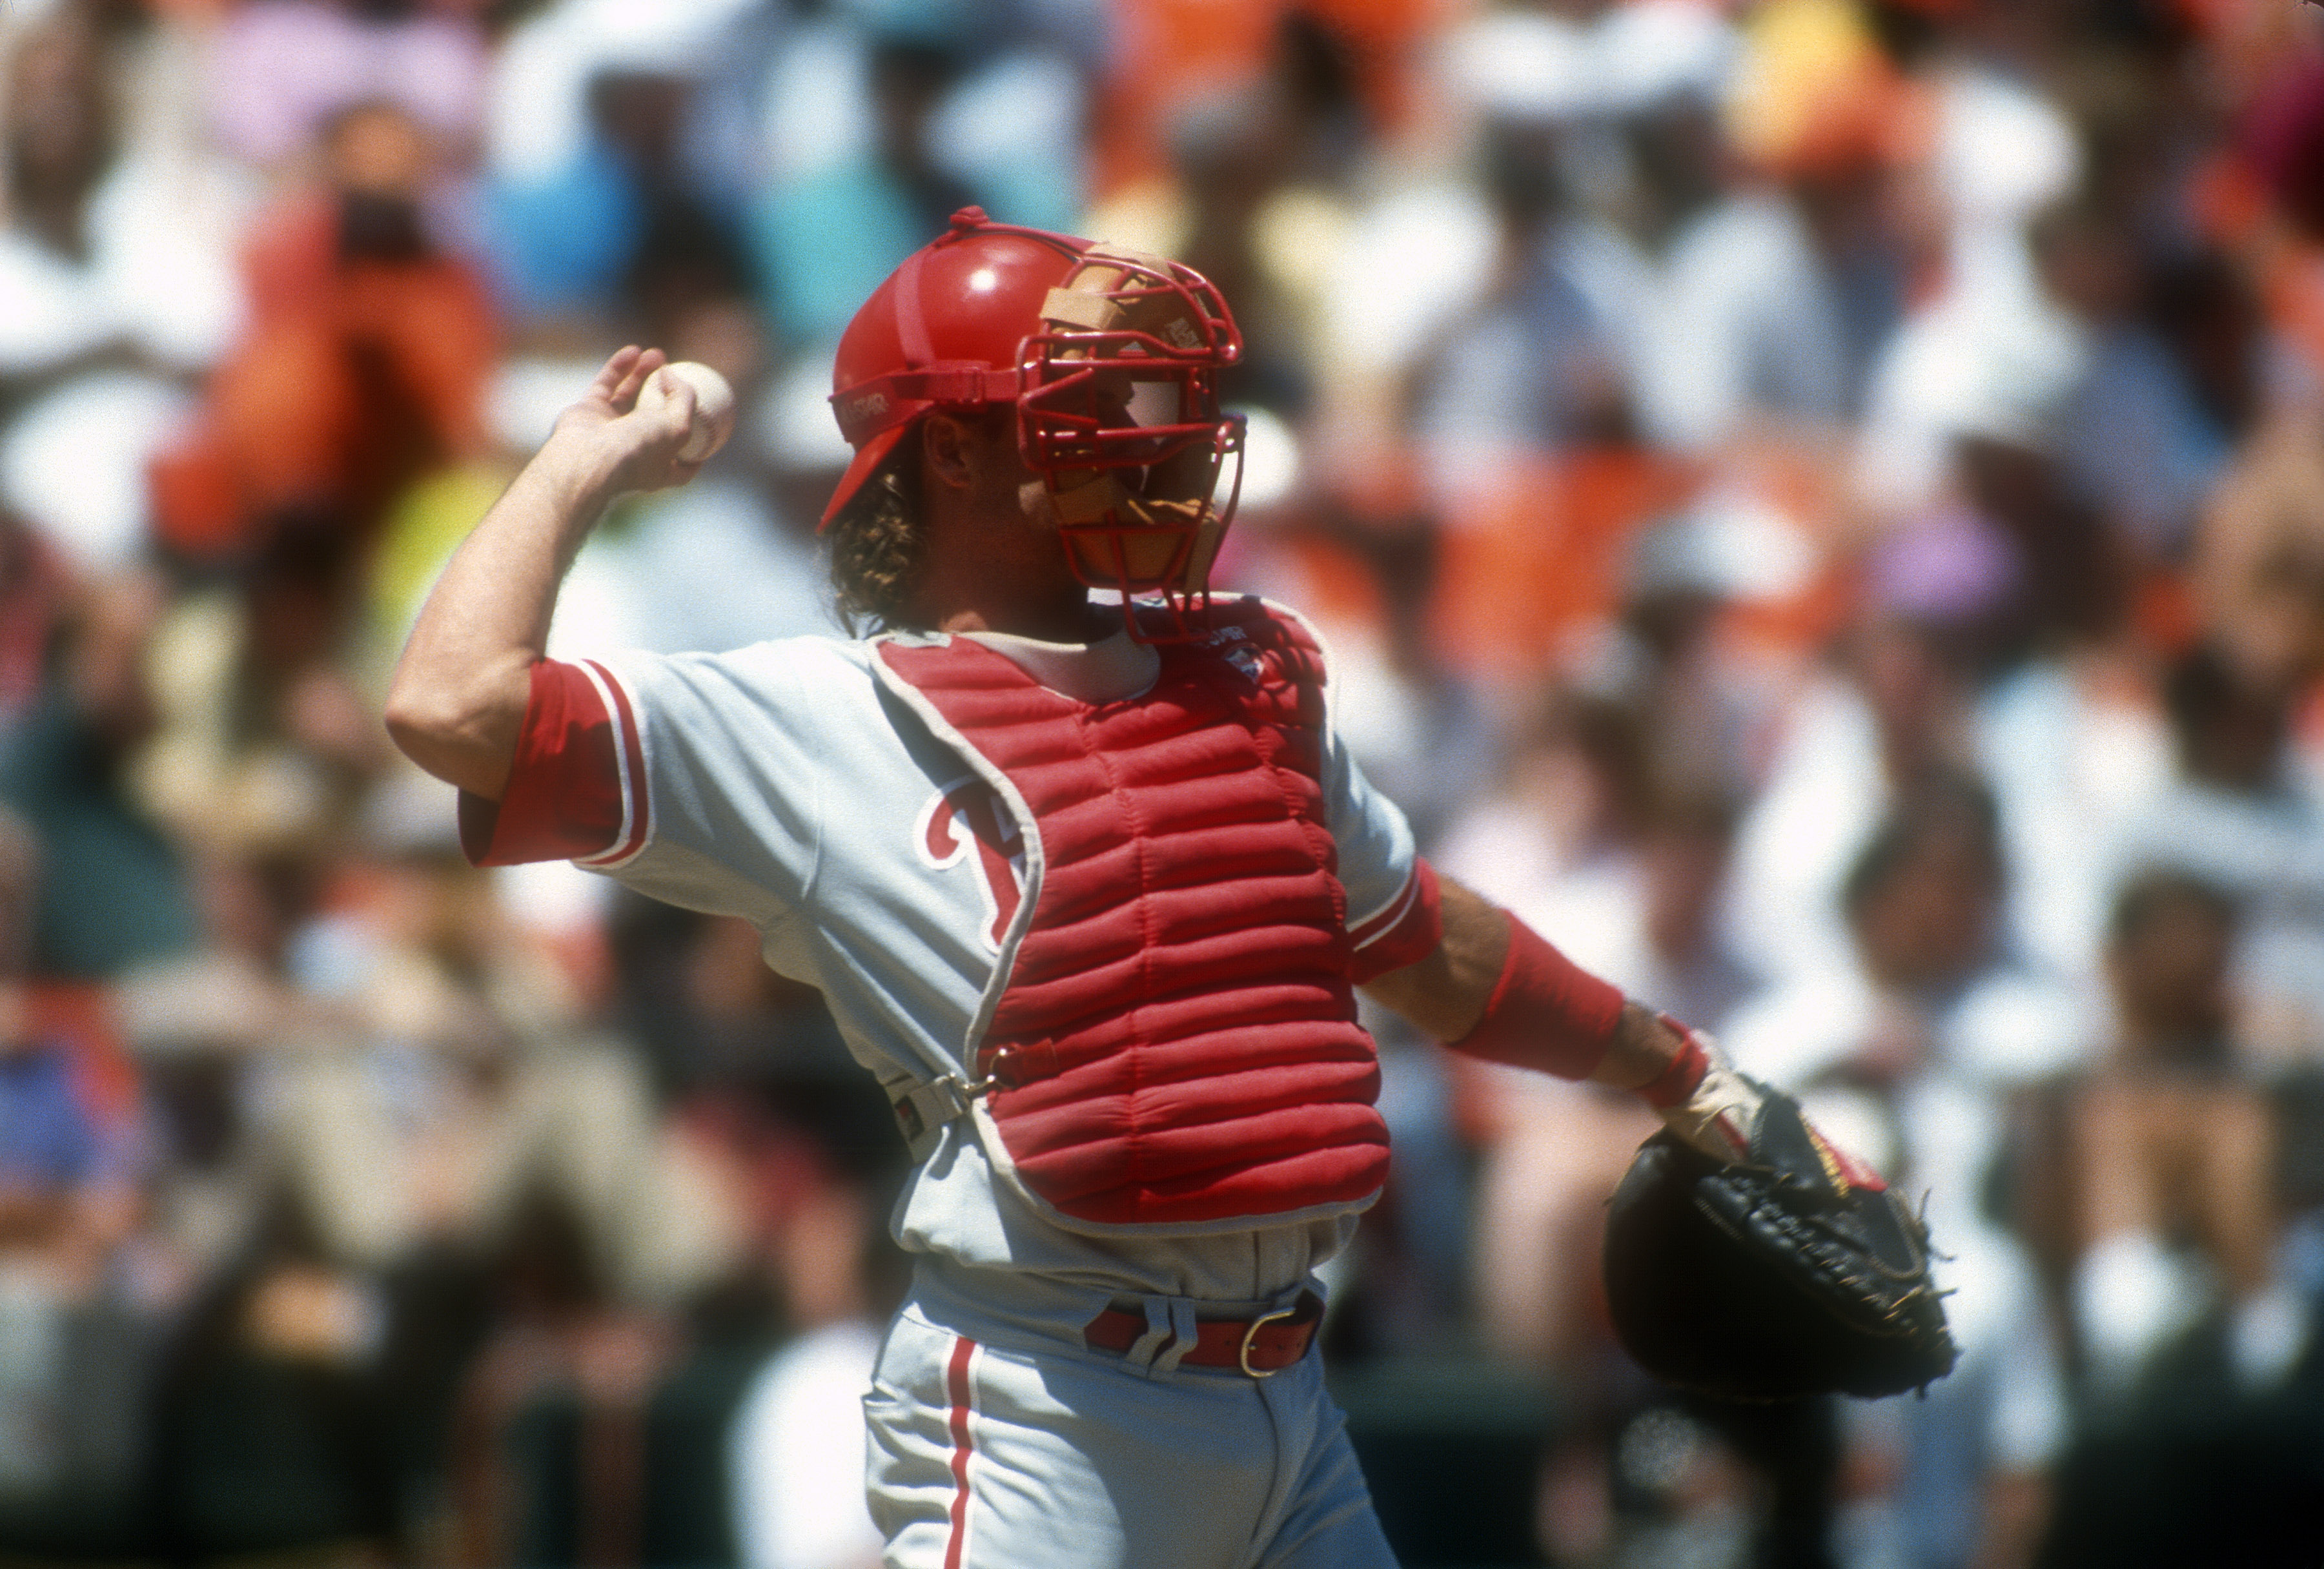 Darren "Dutch" Daulton passed away at the age of 55, after battling a four-year battle with brain cance